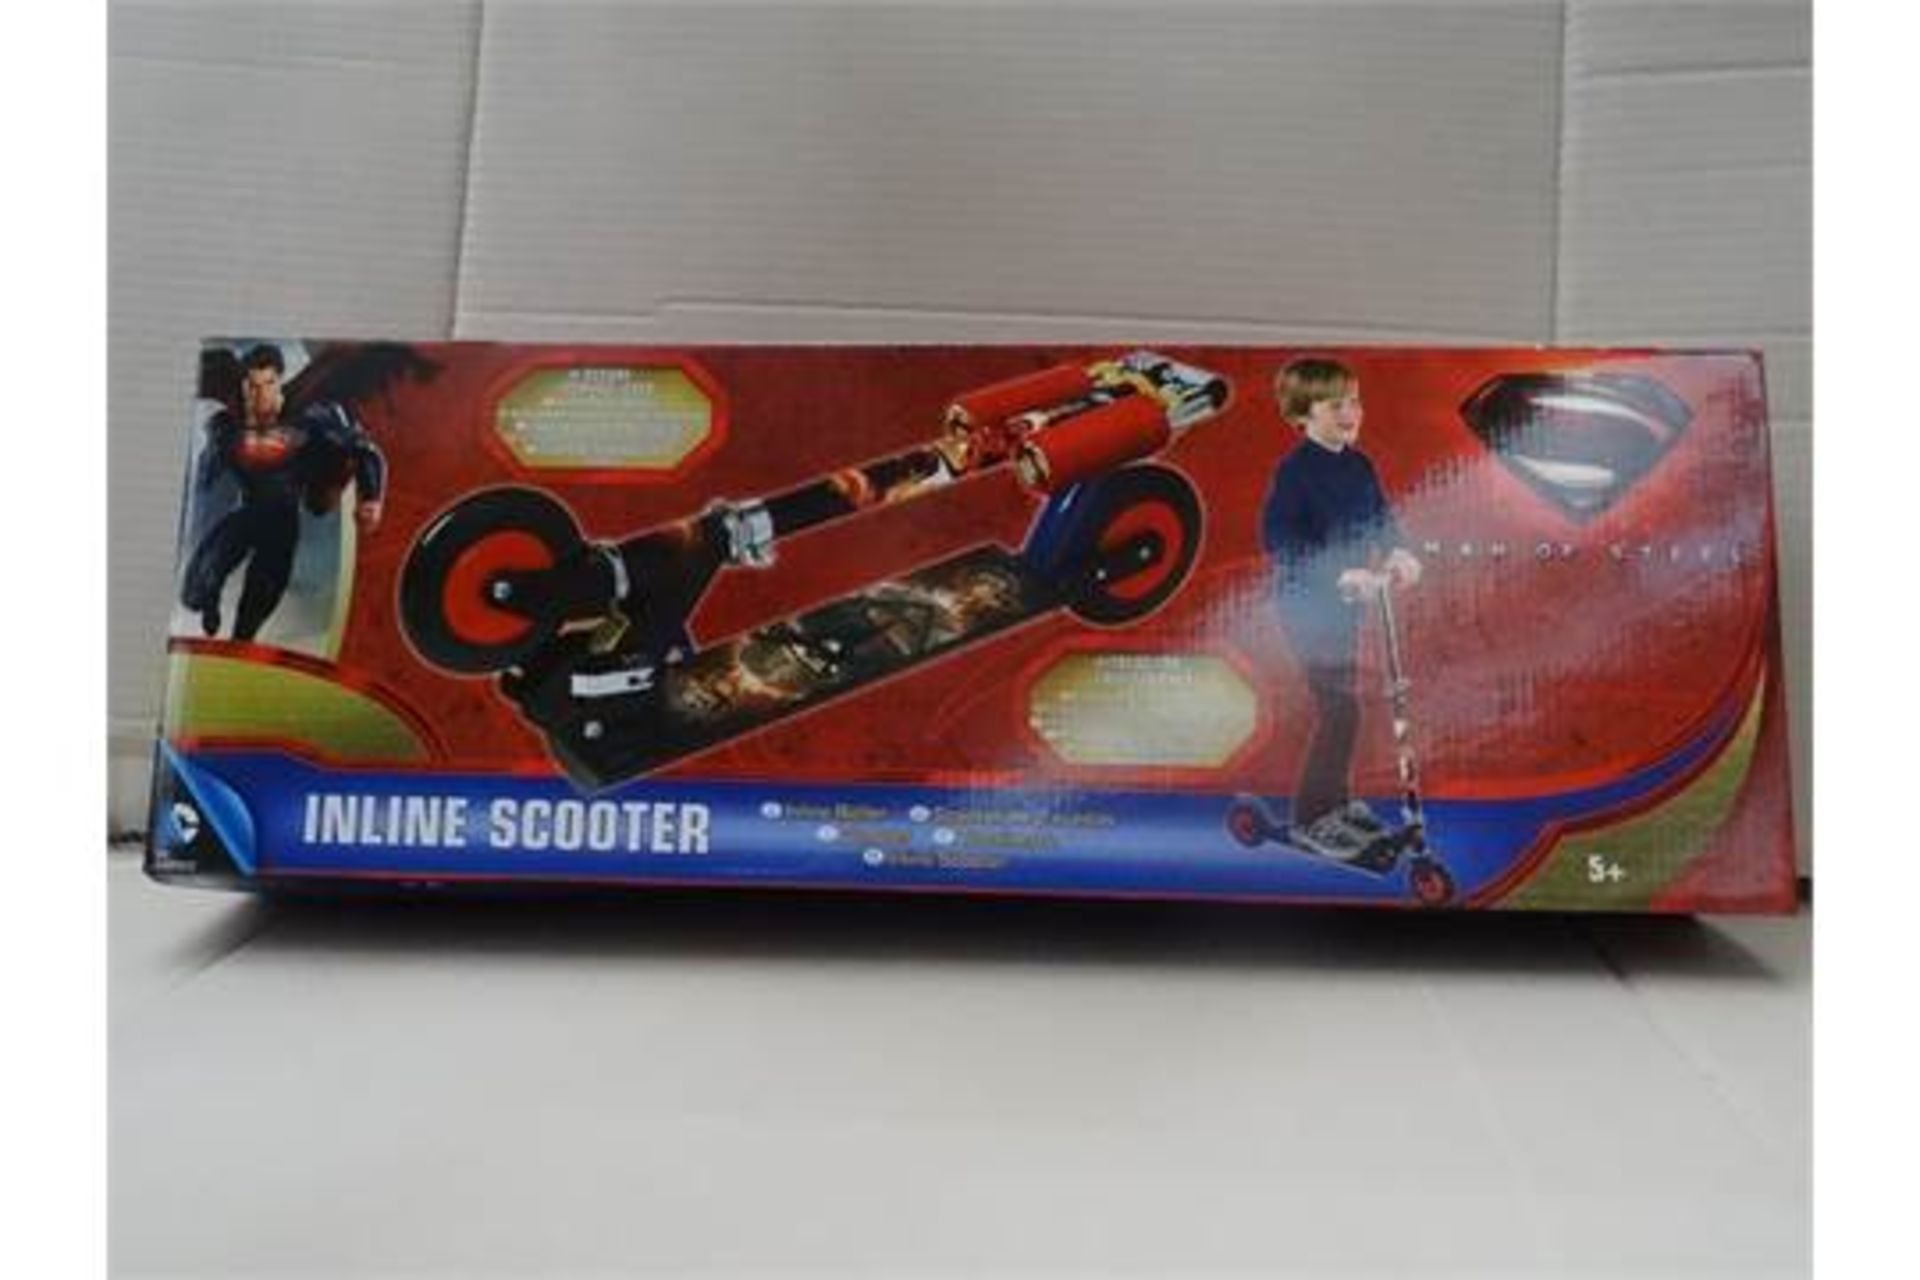 12 x Spiderman Man of Steel DC Comics. Inline Foldable Scooter. Folds for easy storage, Secure